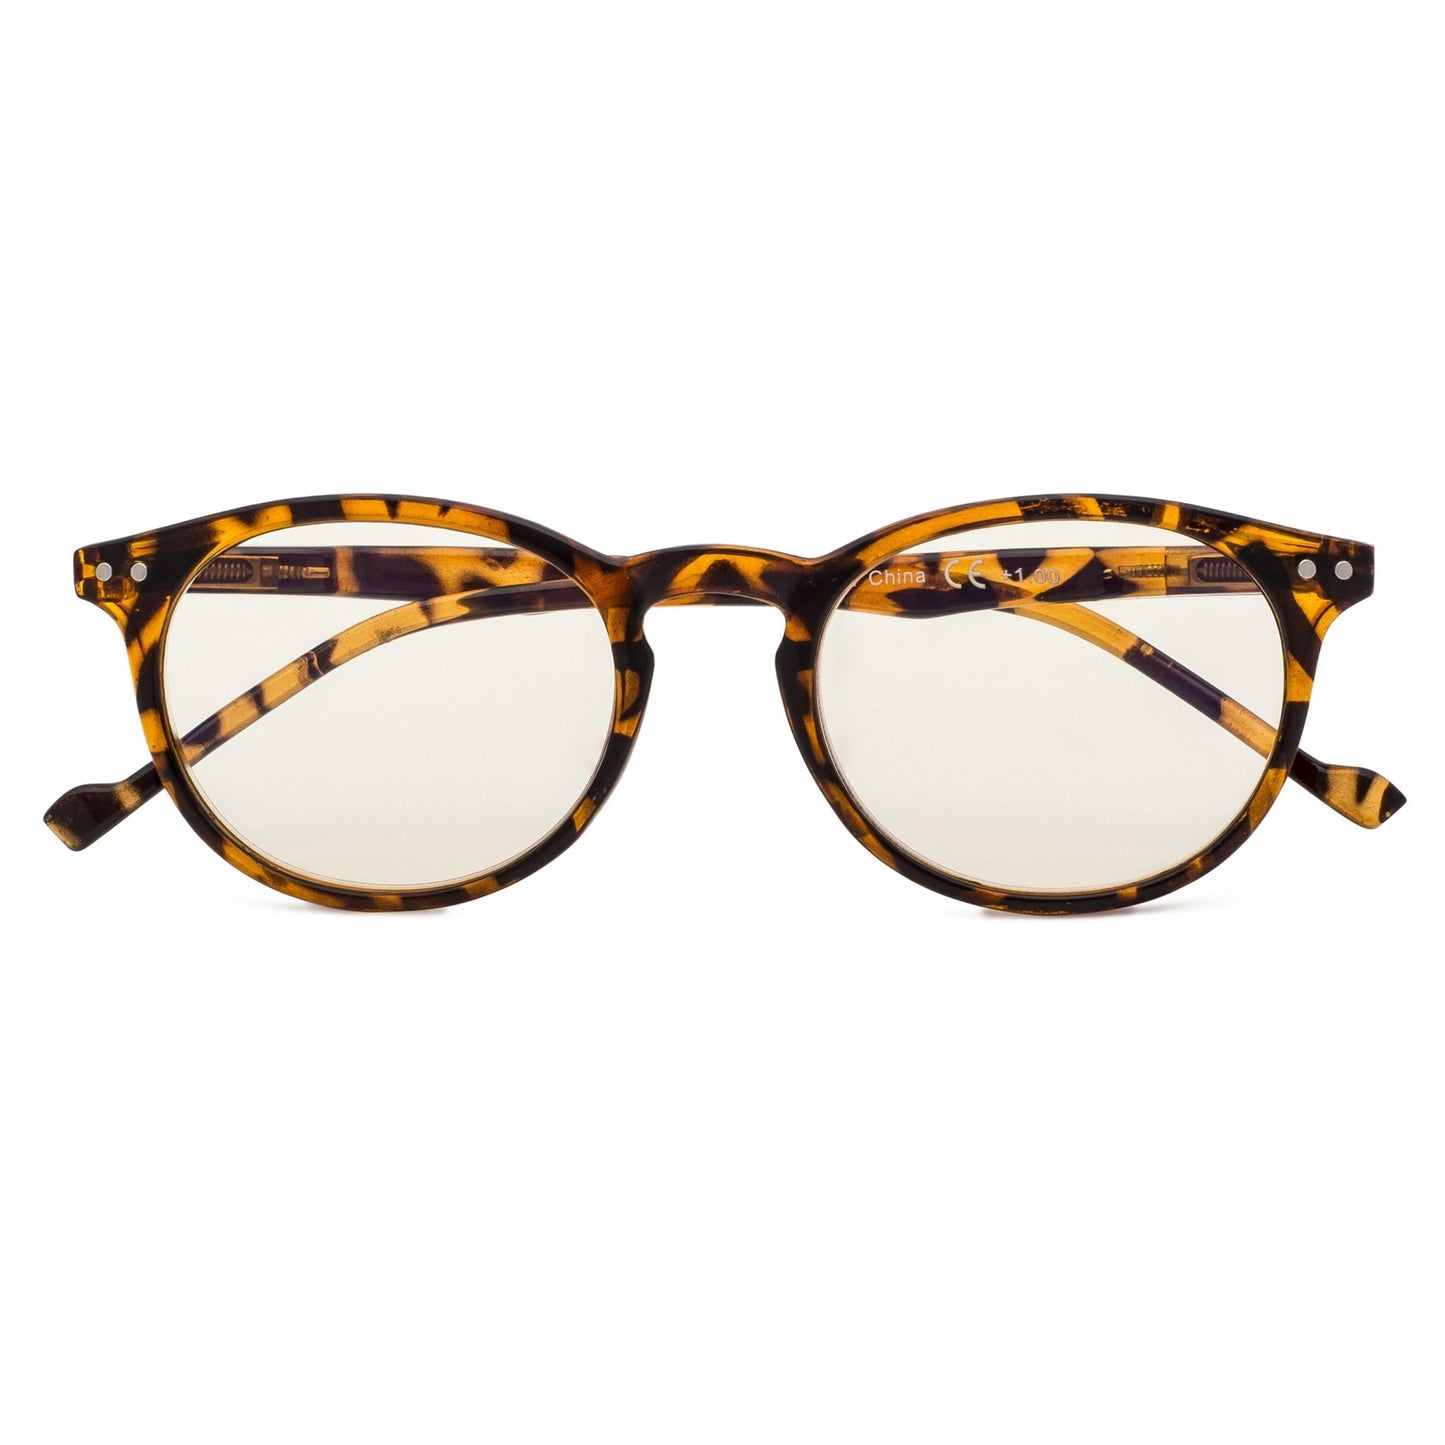 Oval Round Computer Reading Glasses Tortoise 1-CG071